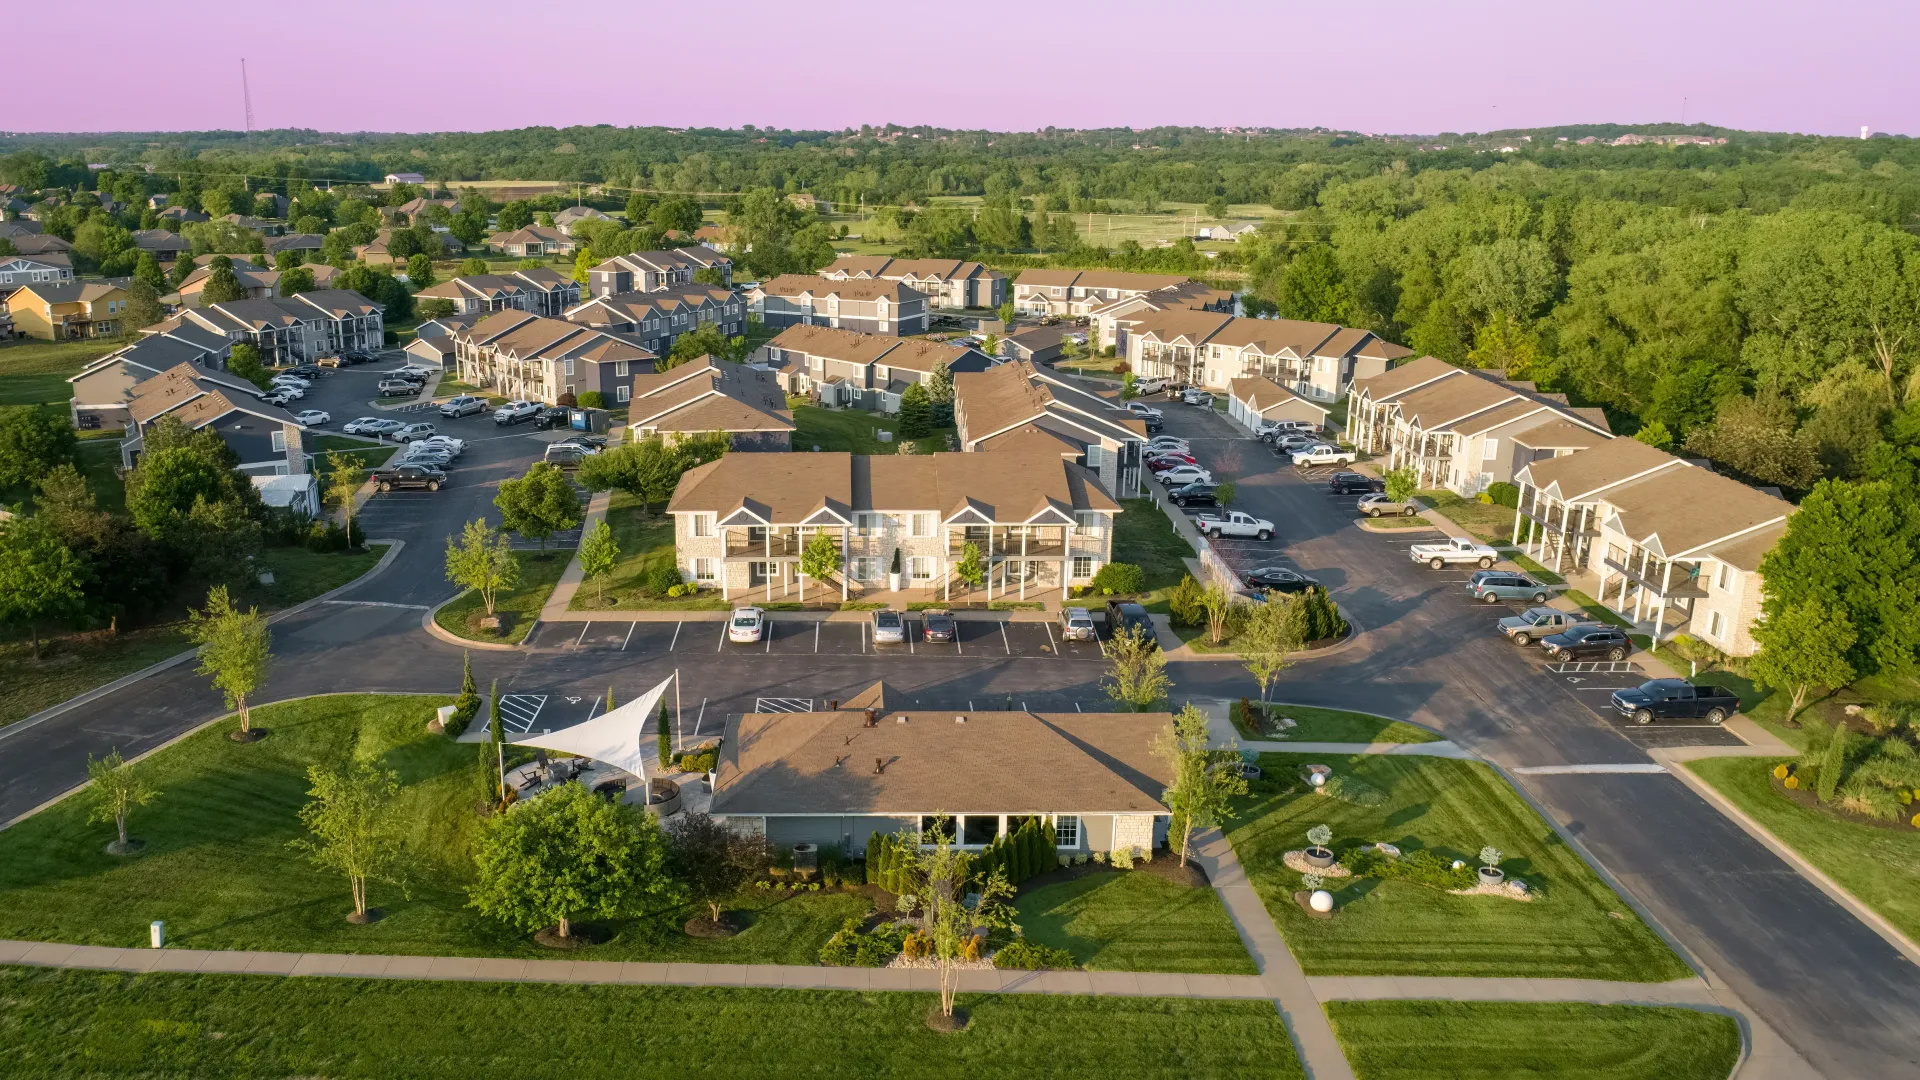 An awe-inspiring aerial view captures the Emory Lakes apartment community